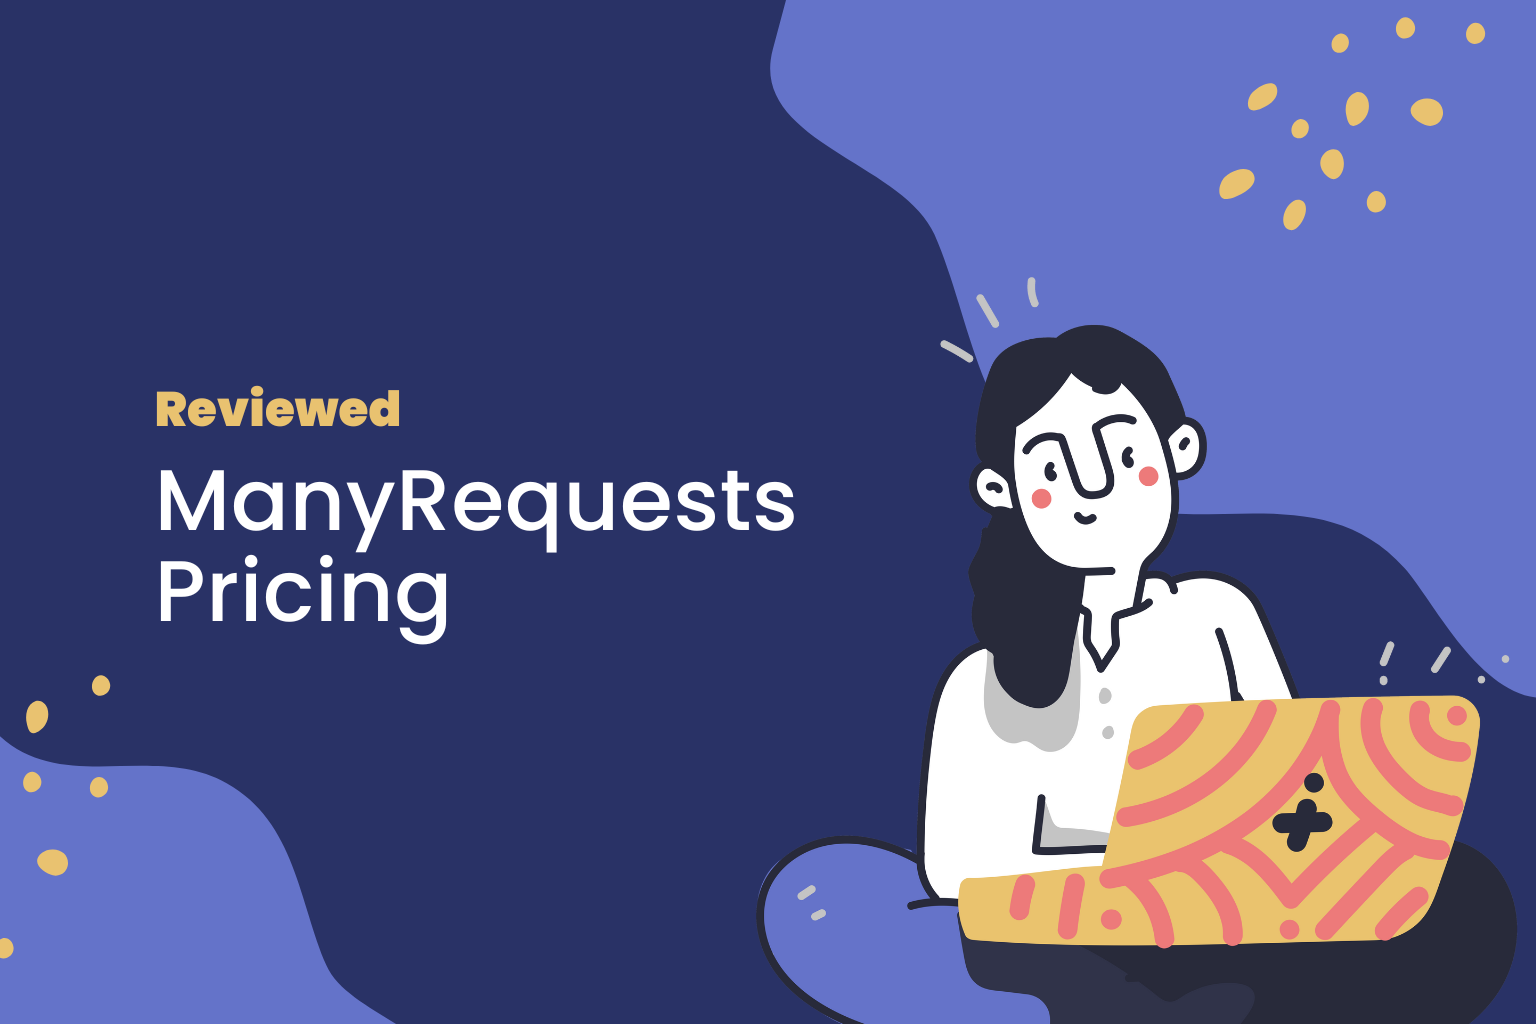 ManyRequests Pricing Reviewed